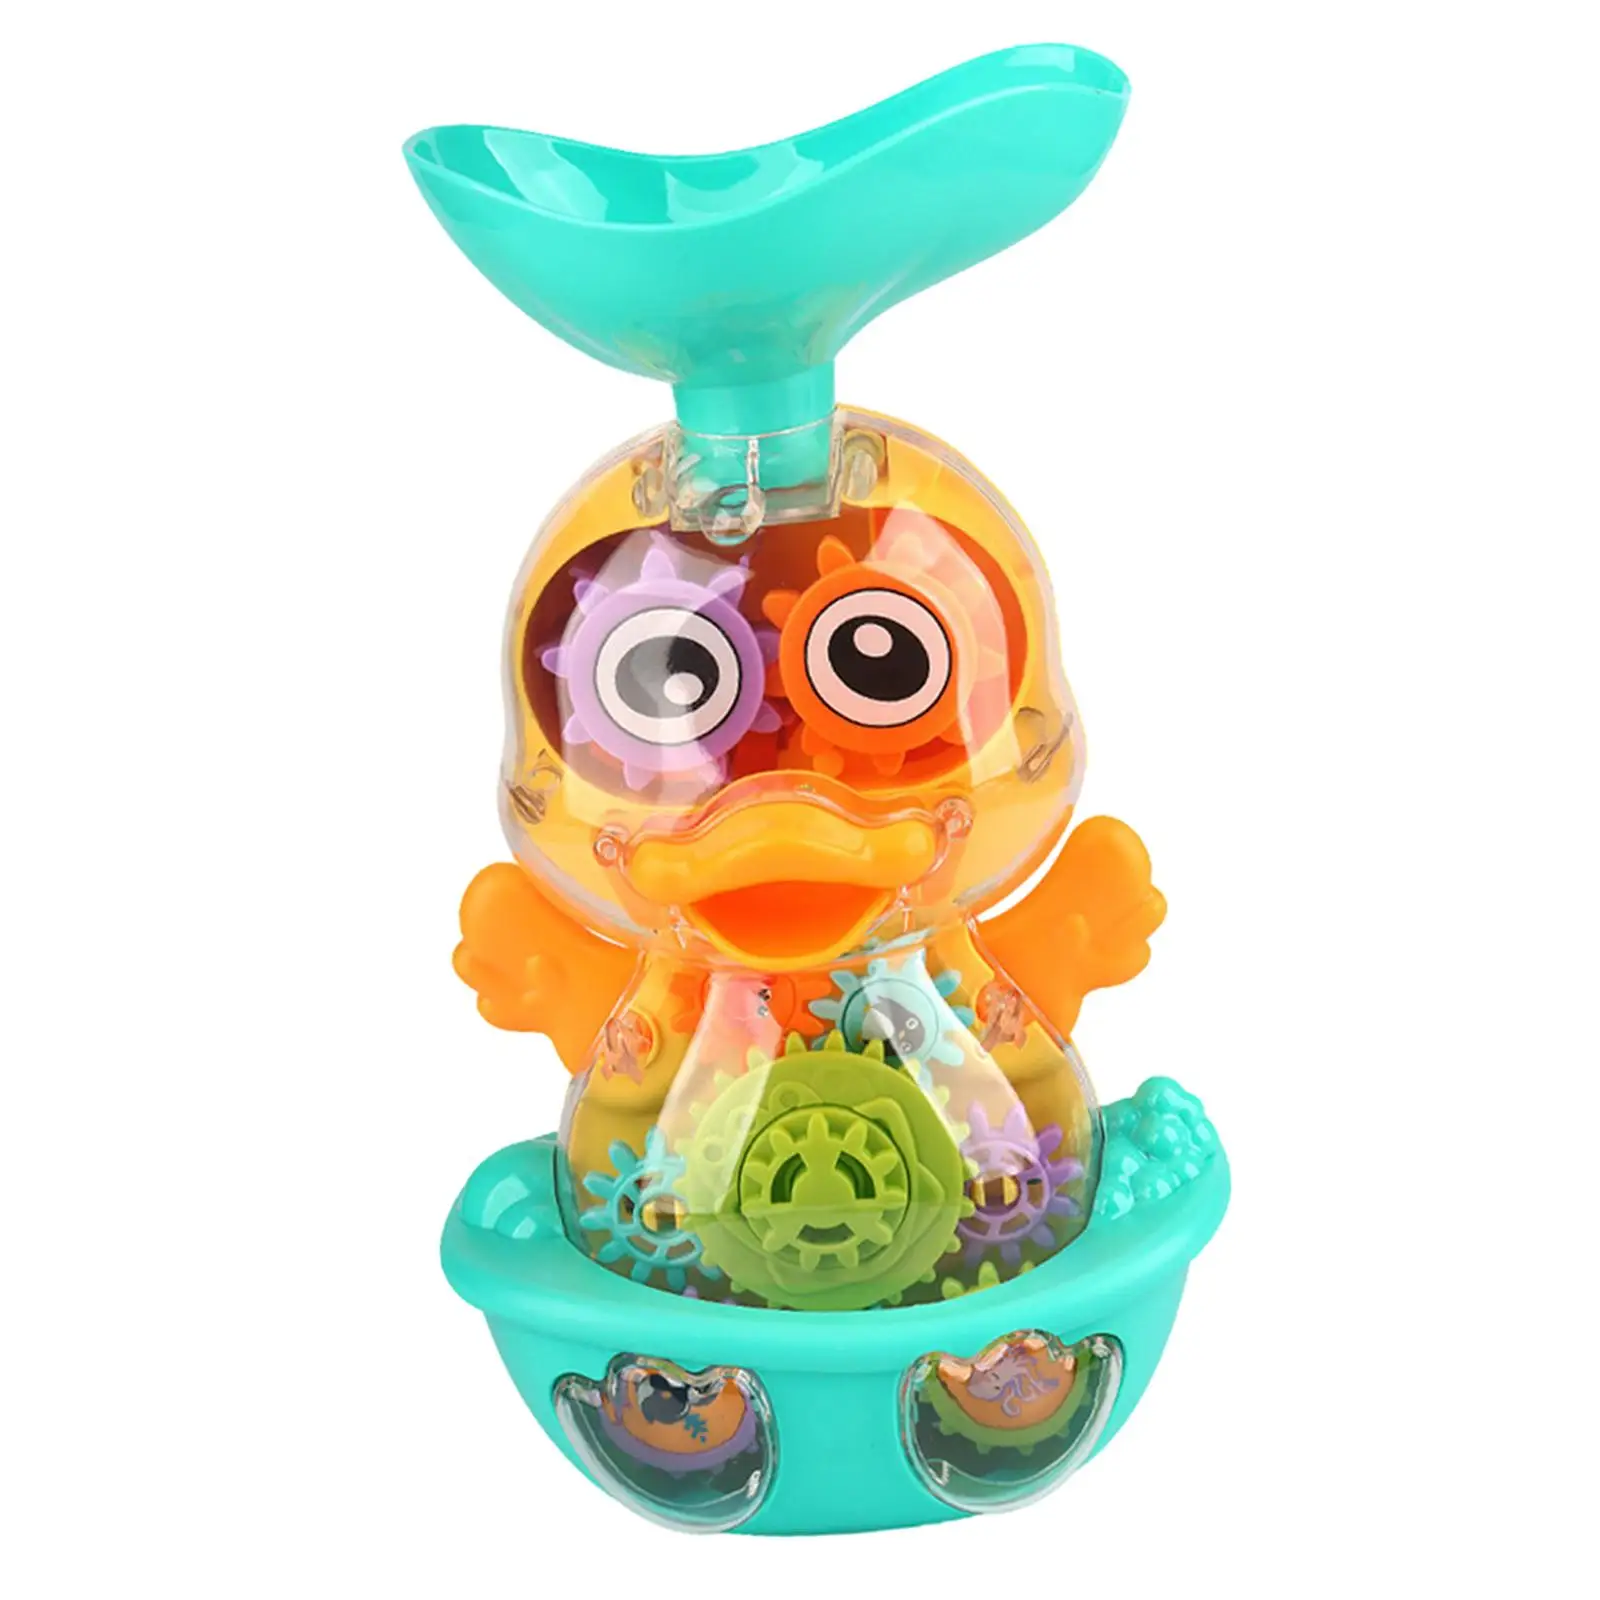 Duck Bath Toys Gear Toy Bathtub Duck Toy for Children Kids Holiday Gifts